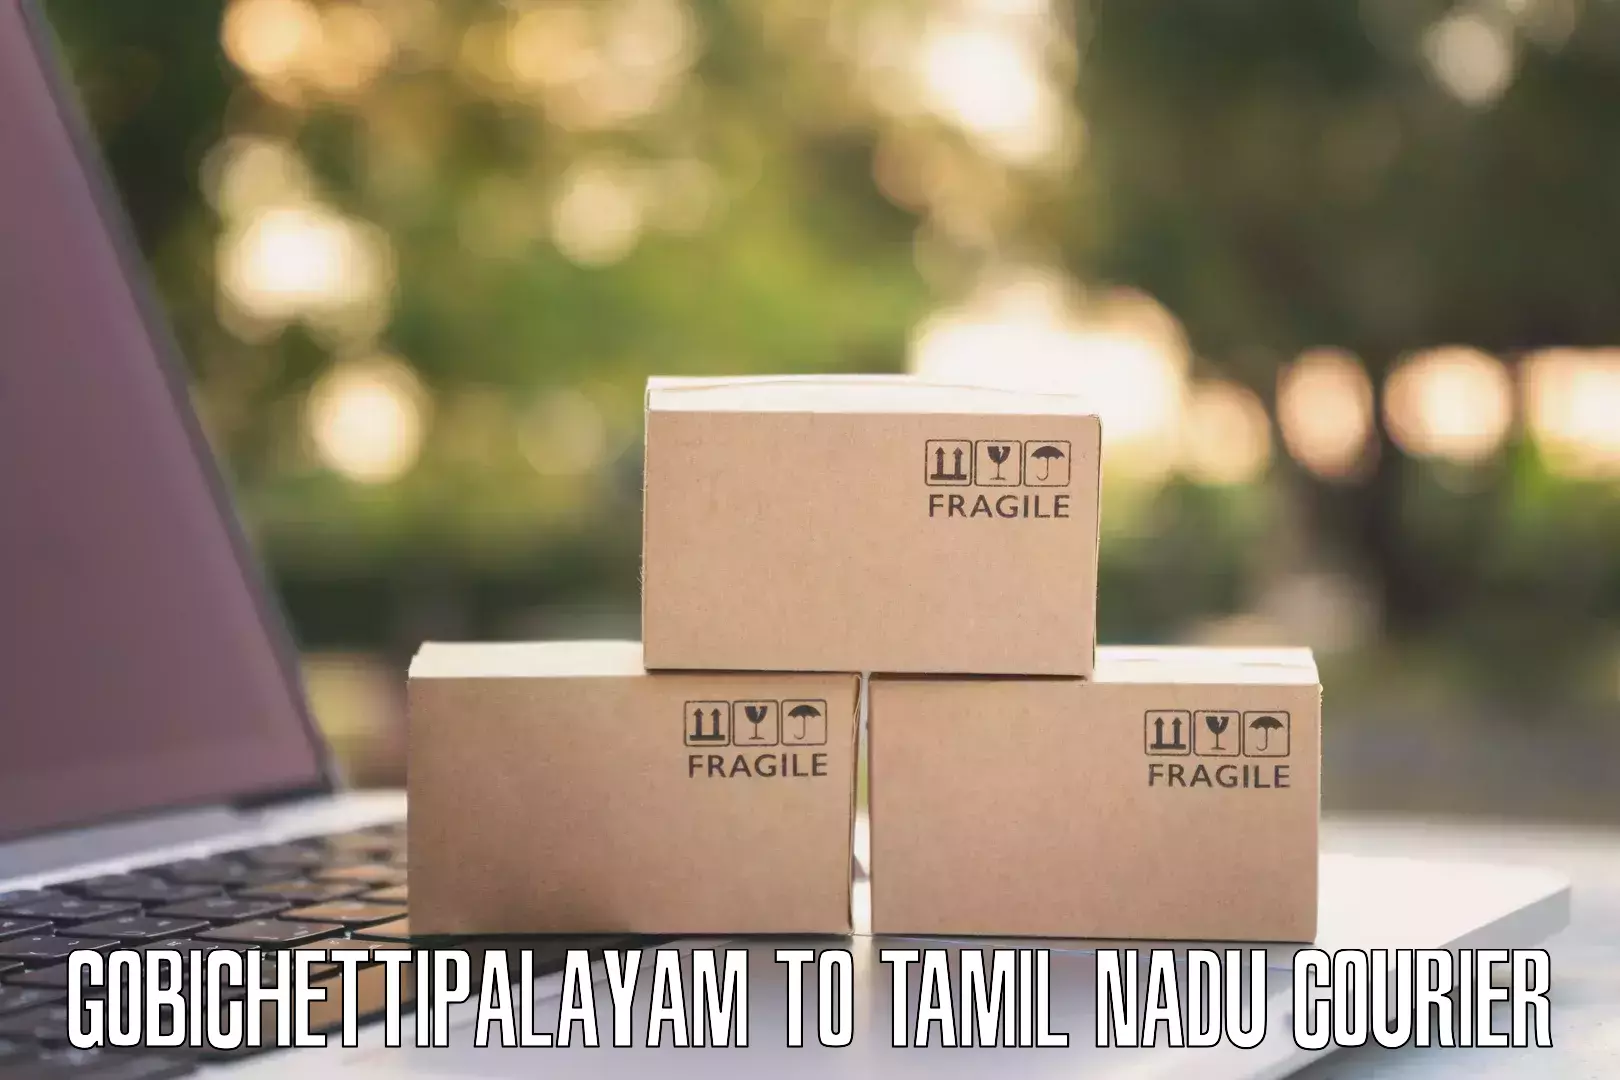 Sustainable delivery practices Gobichettipalayam to Tamil Nadu